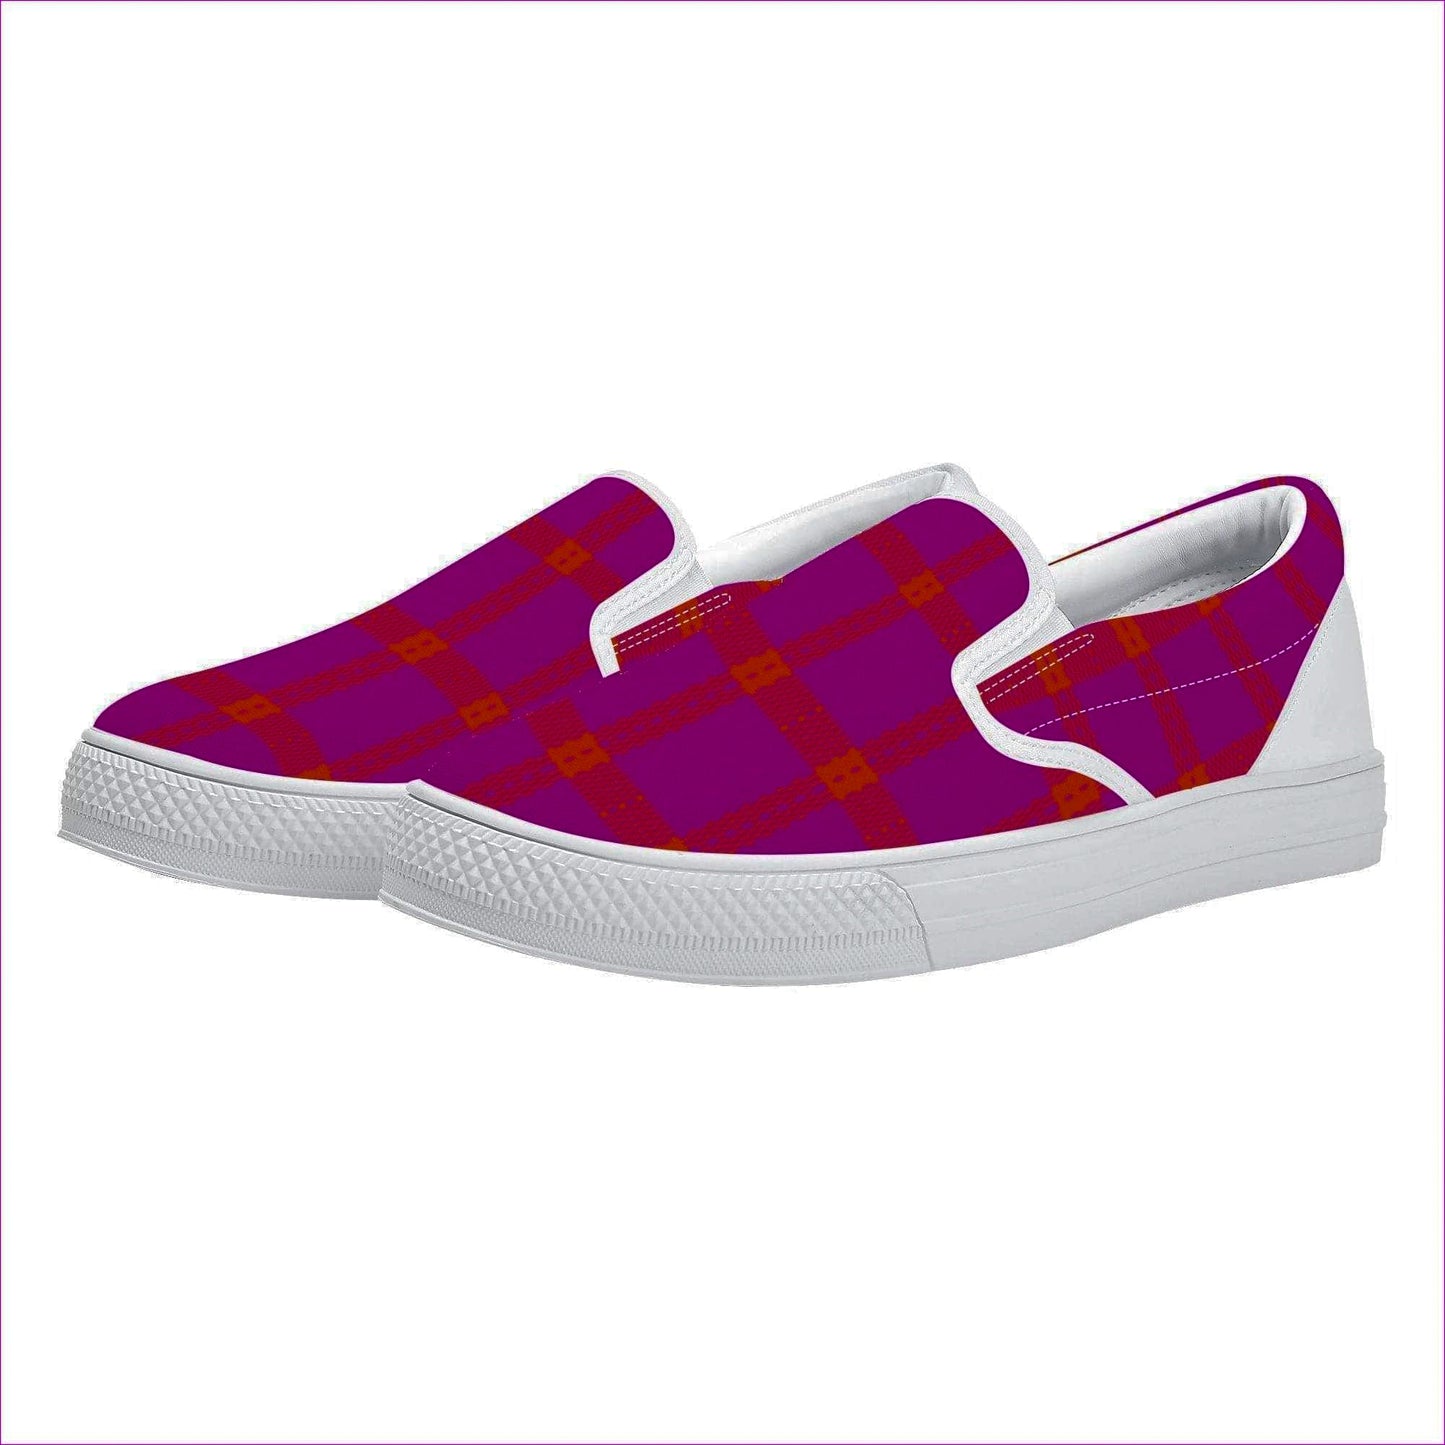 Perfusion Plaid Slip-on Shoes - women's shoe at TFC&H Co.